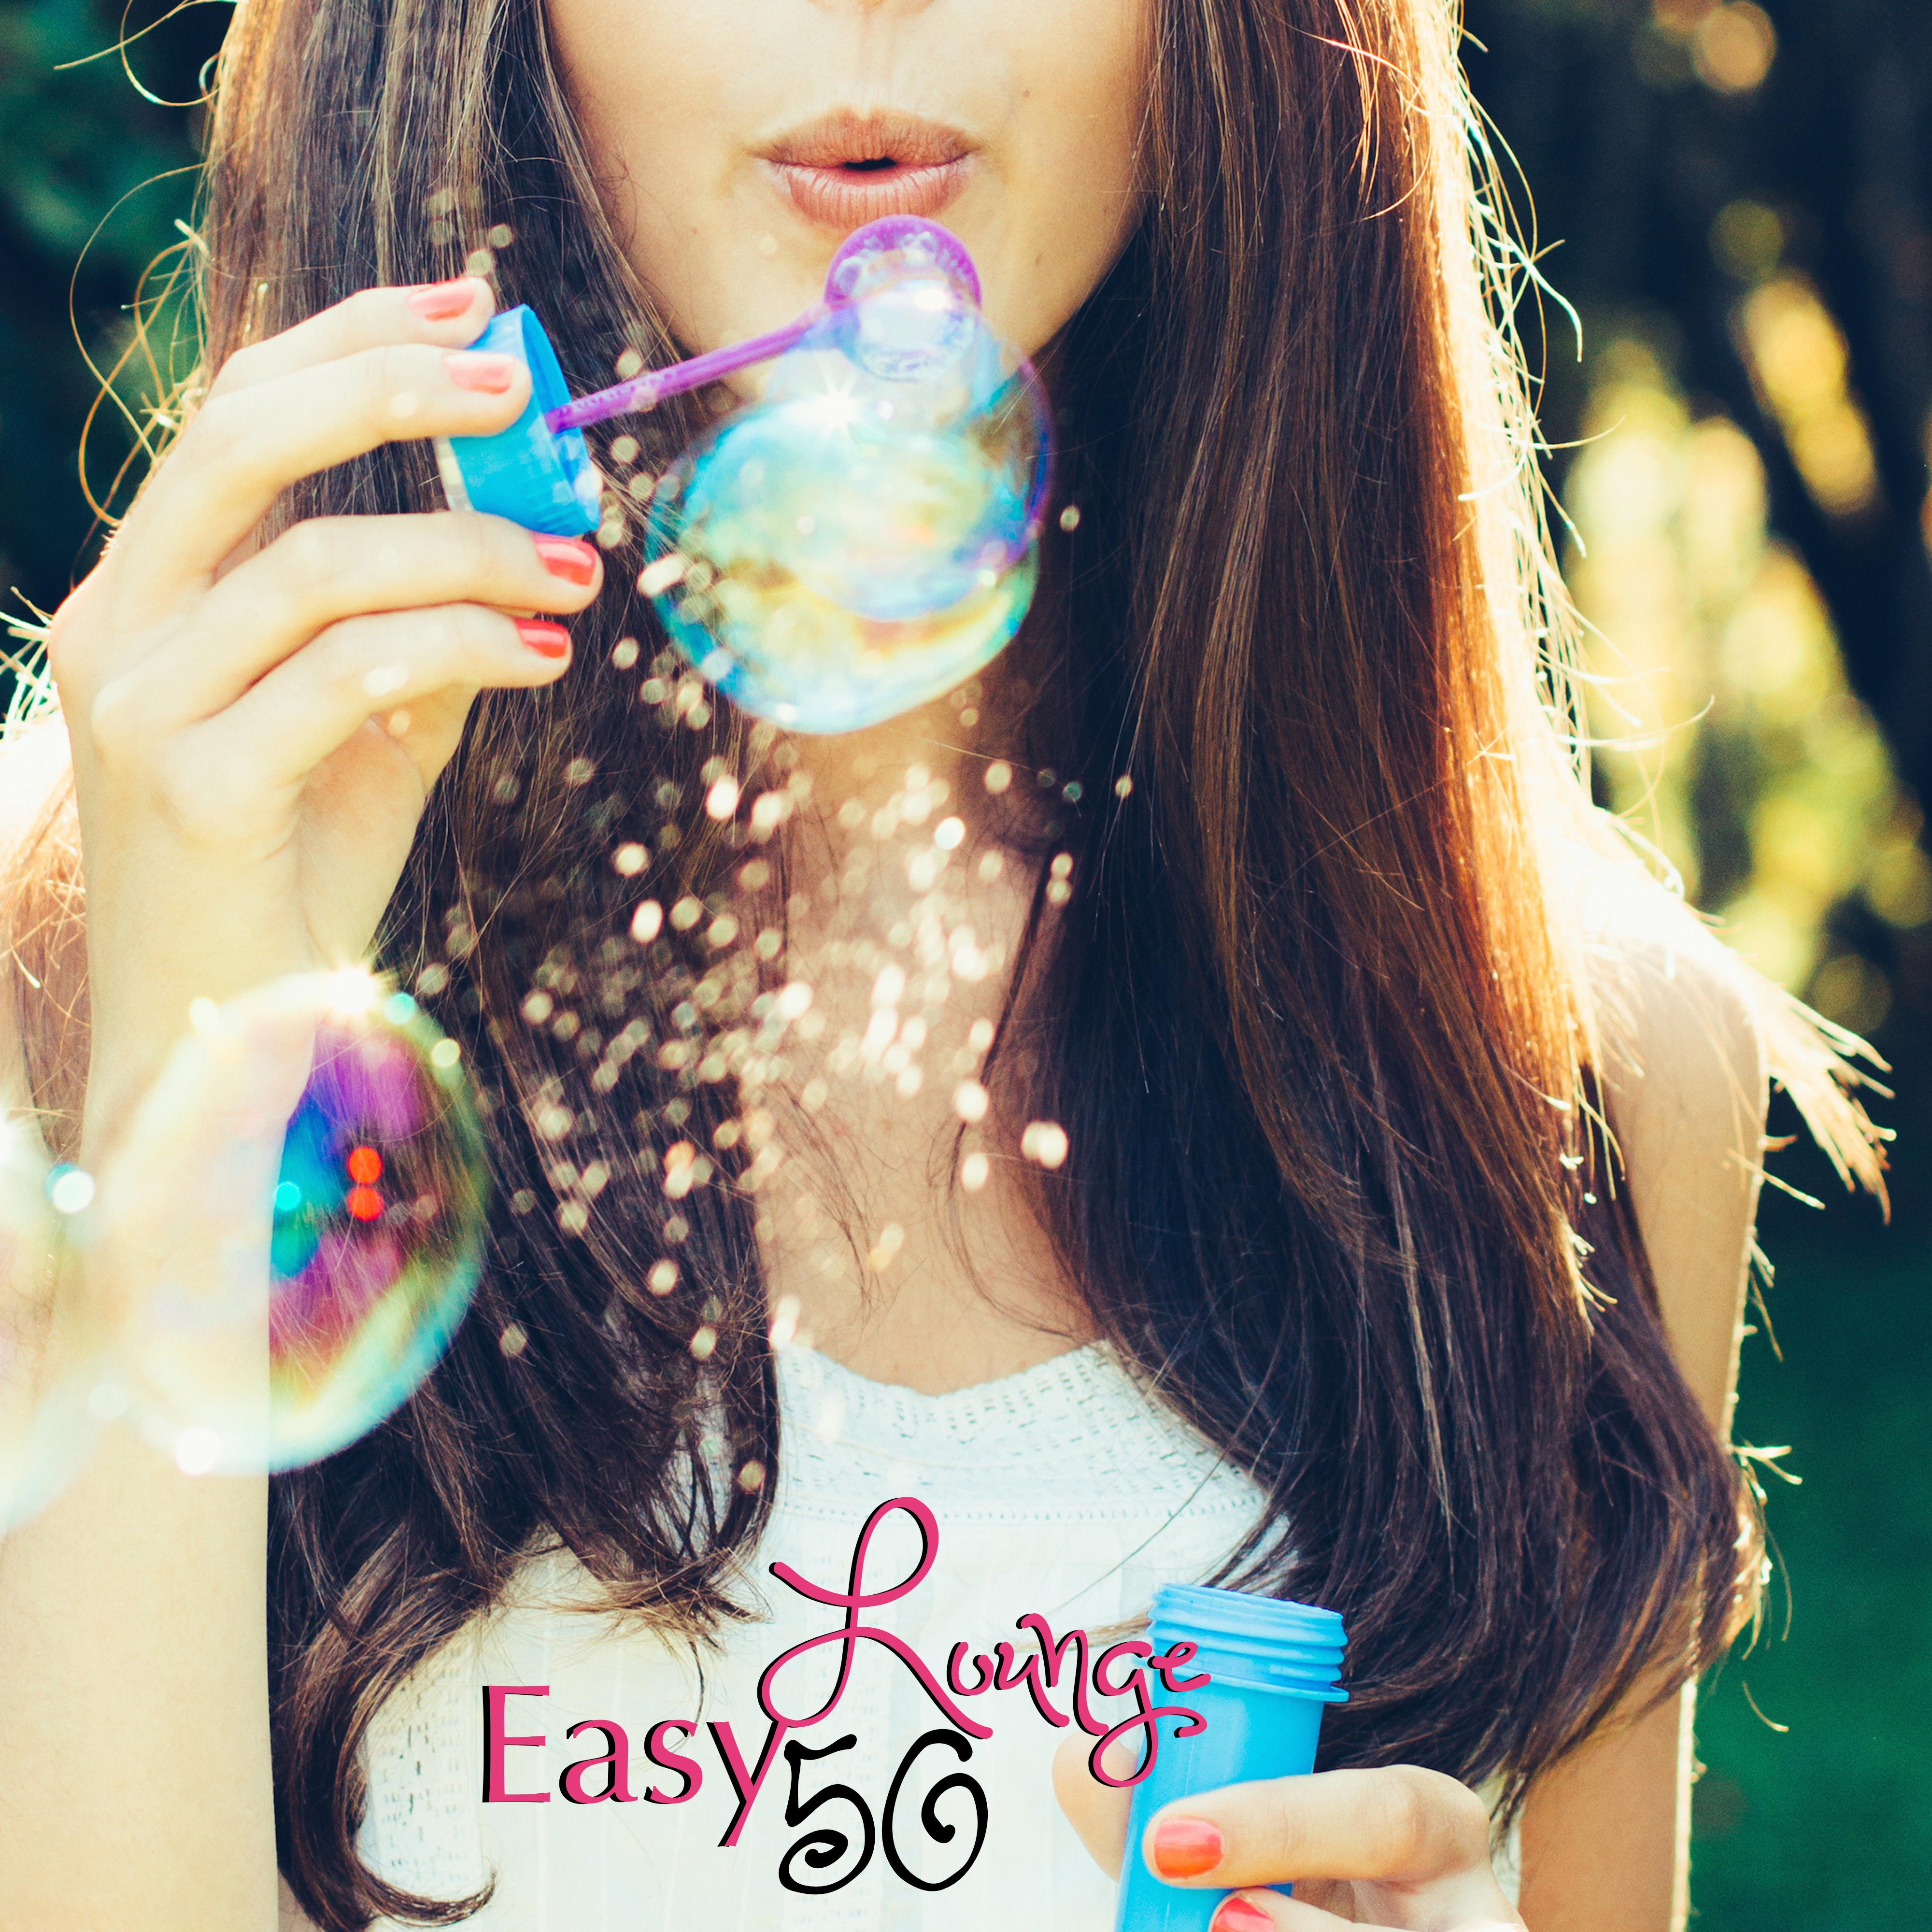 Easy Lounge 50 - Best Lounge Music Playlist 2015, Easy Listening Chill Out Electronic Music Greatest Hits